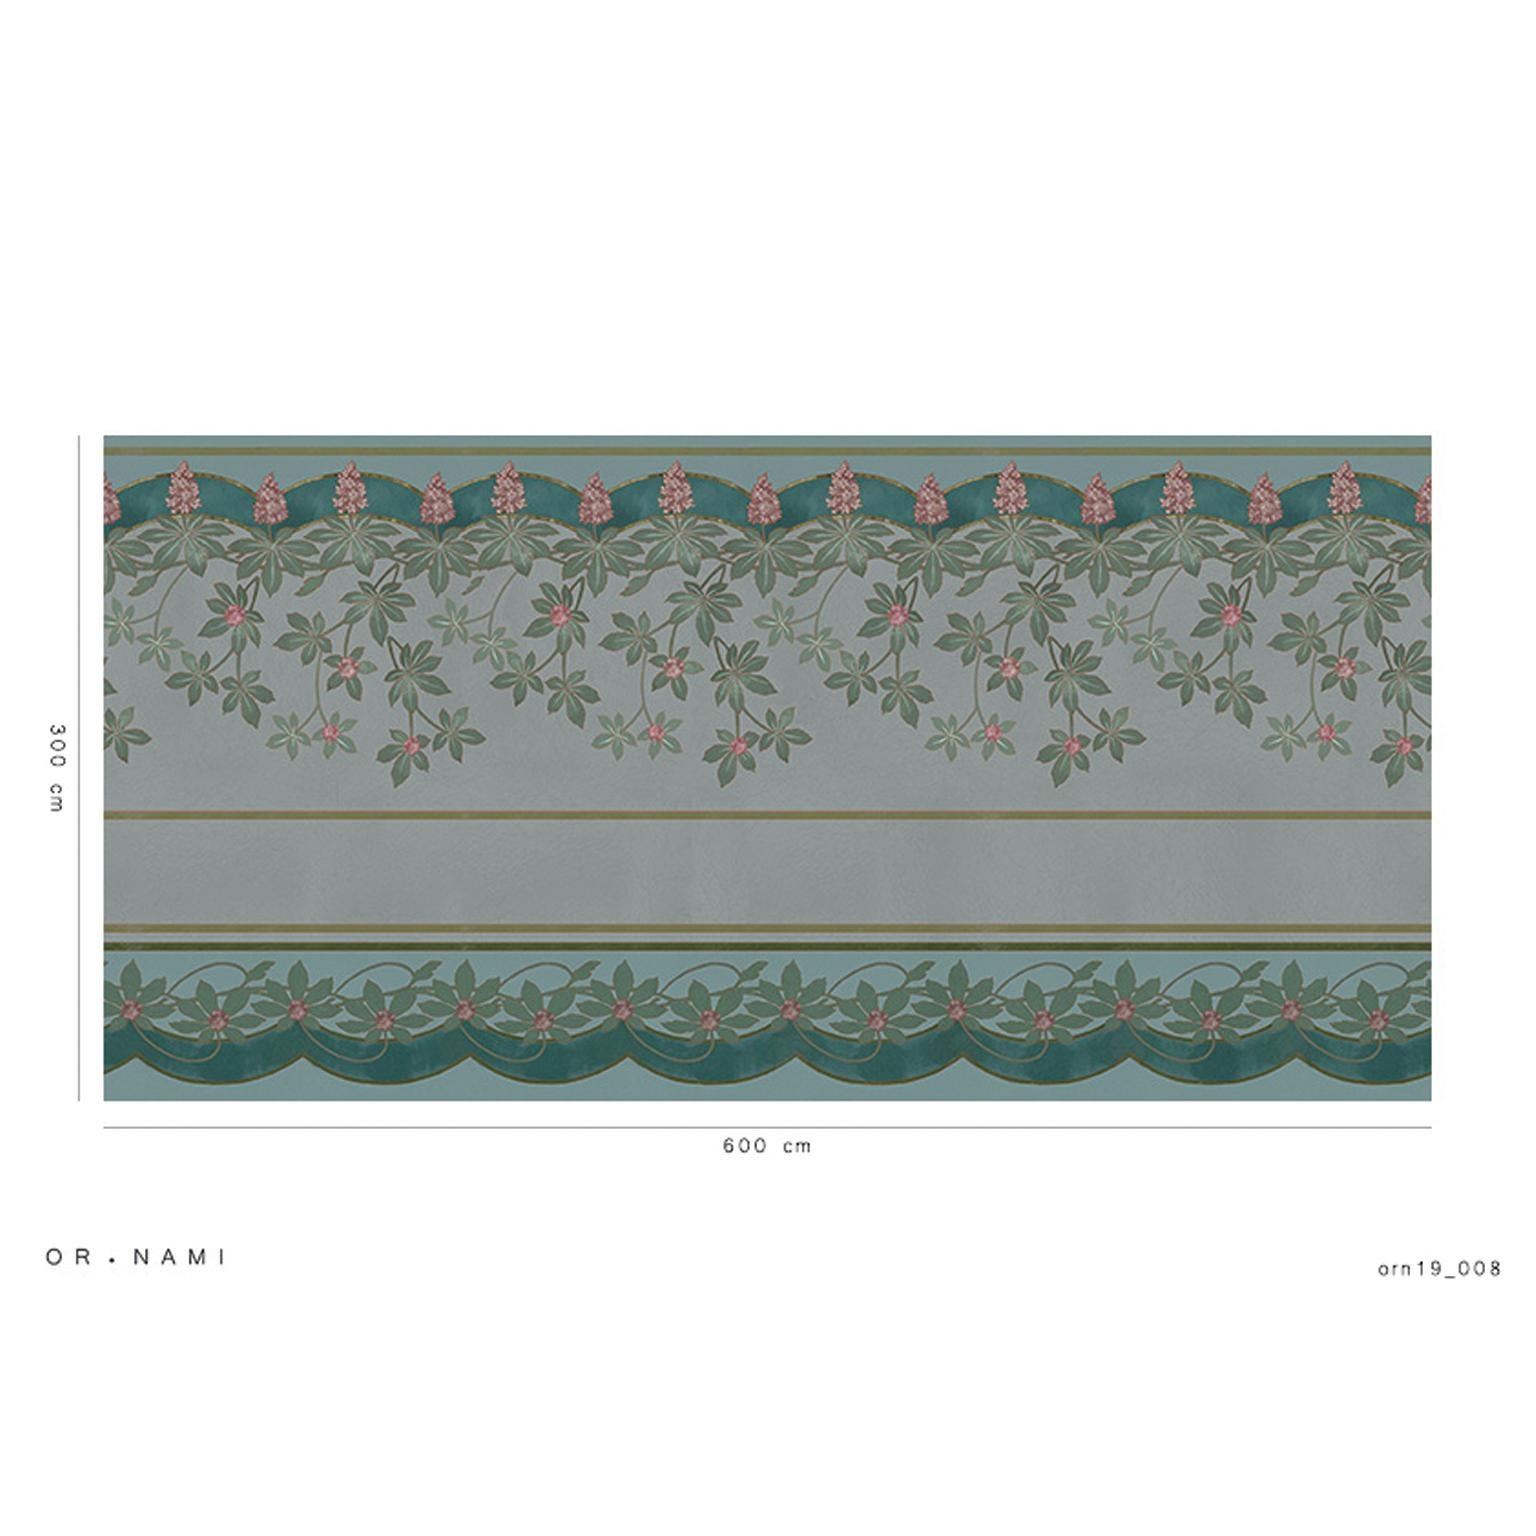 Contemporary Ornami Art Nouveau Winter Vinyl Wallpaper Made in Italy Digital Printing For Sale